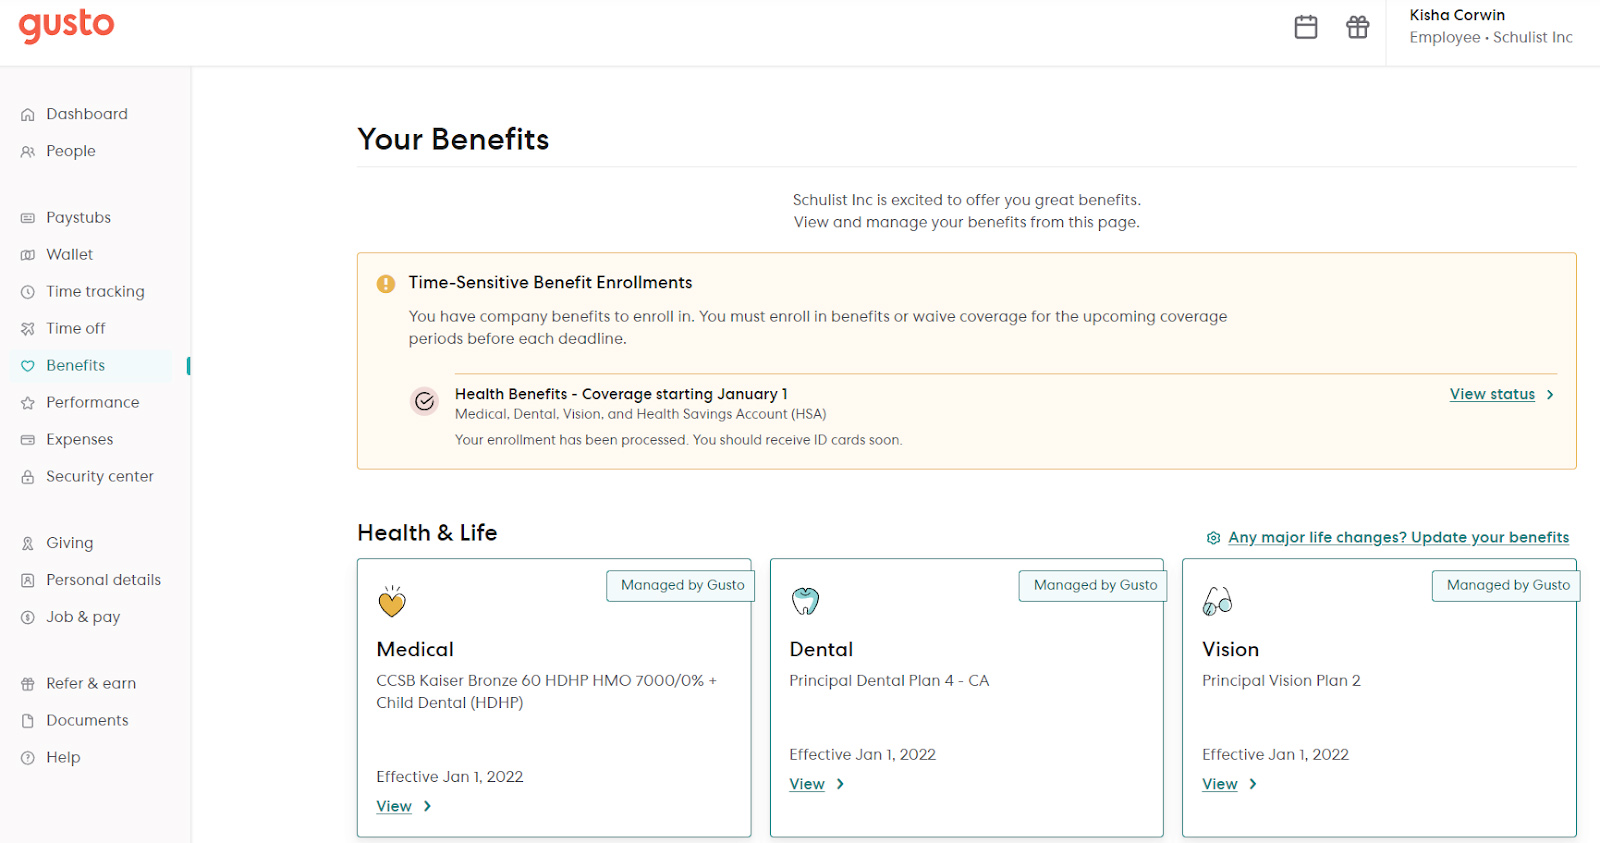 Gusto Benefits page.